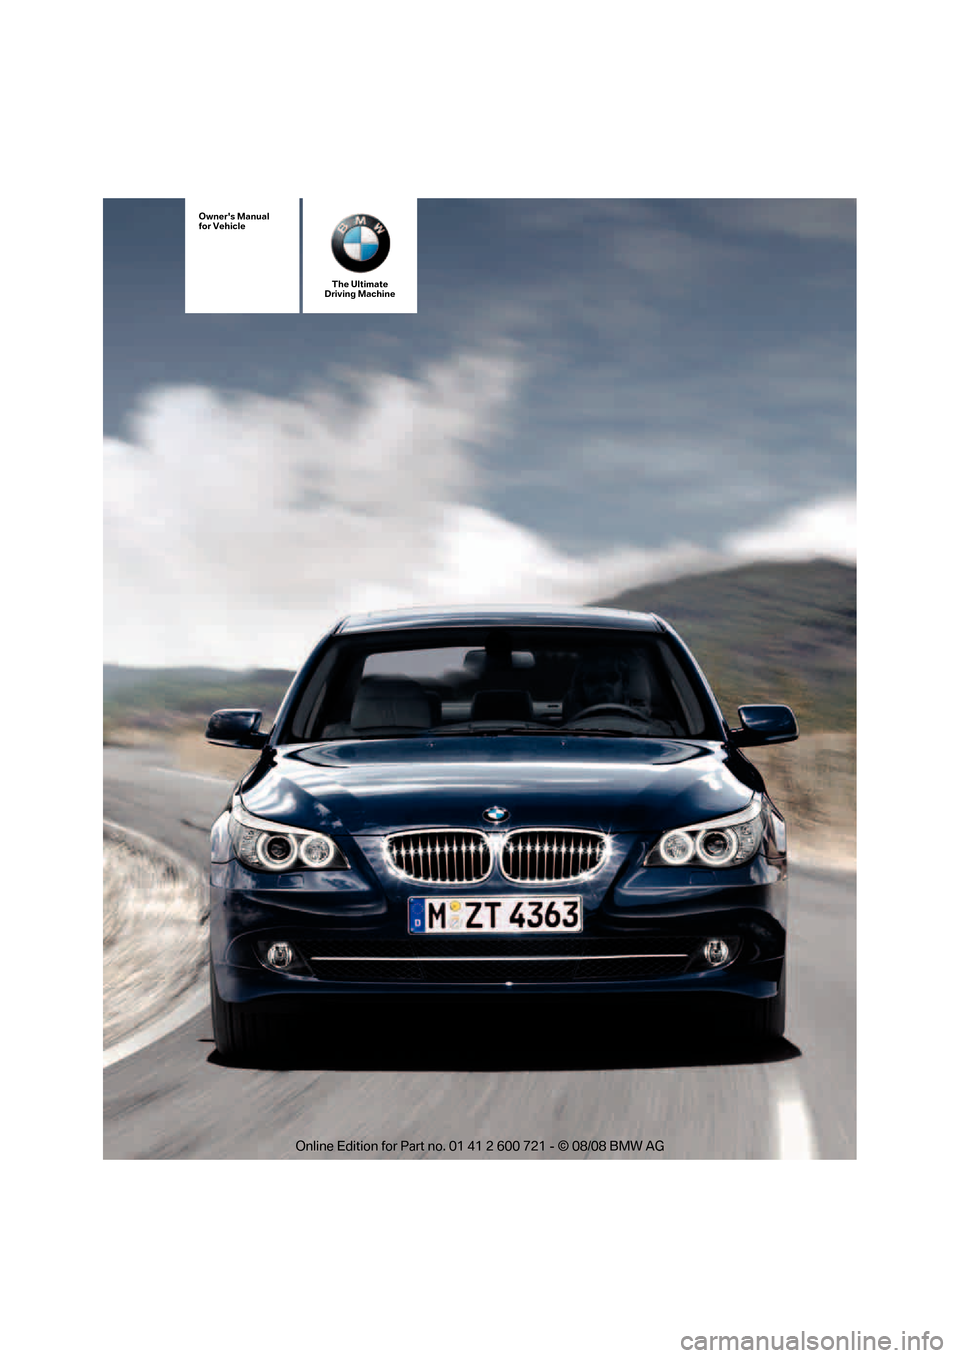 BMW 550I SEDAN 2009 E60 Owners Manual The Ultimate
Driving Machine
Owners Manual
for Vehicle 